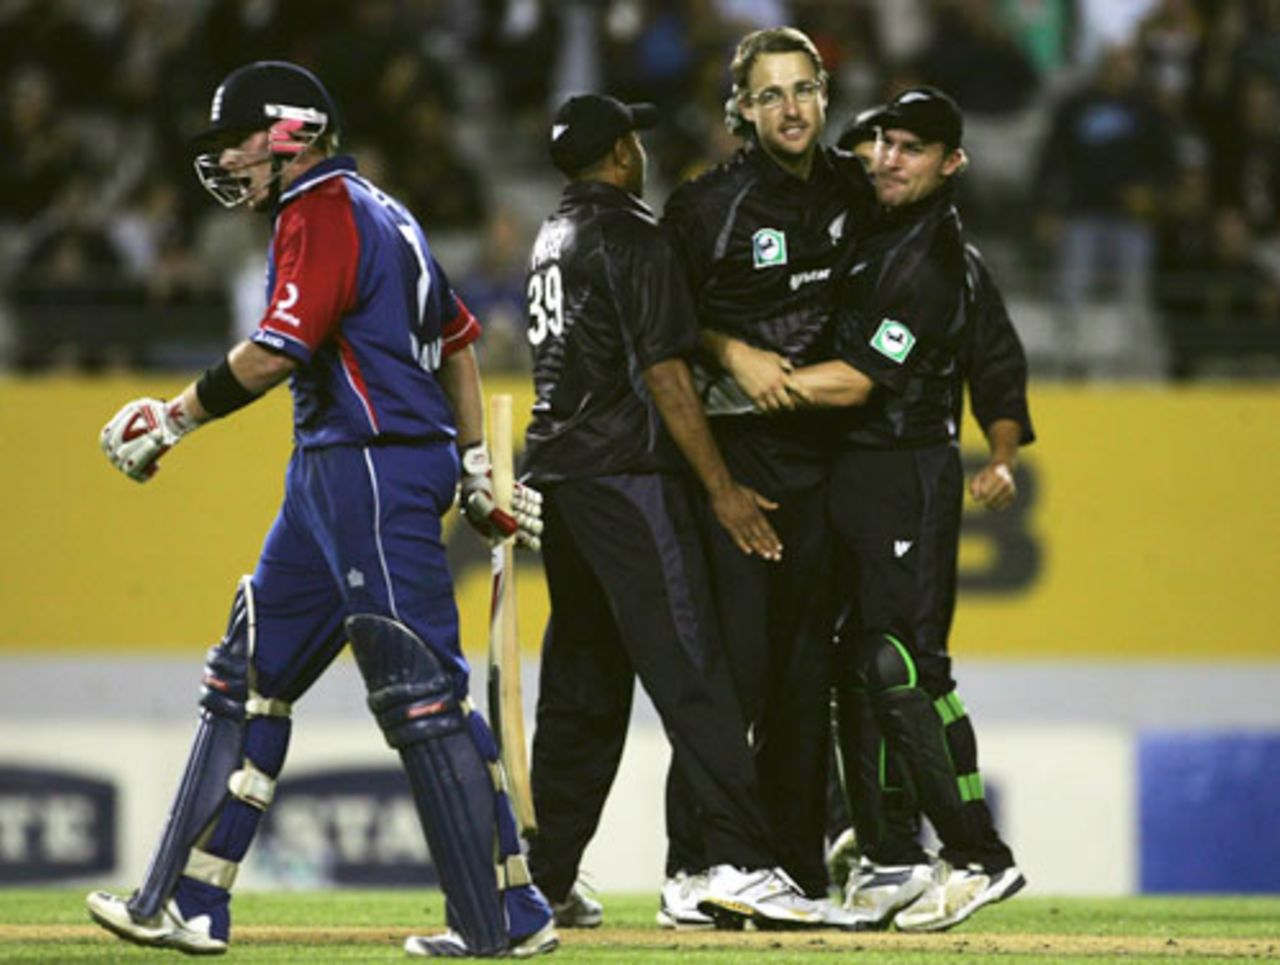 Ian Bell vents his frustration after being given out lbw to Daniel Vettori. Replays indicated Bell got an inside edge, New Zealand v England, 3rd ODI, Auckland, February 15, 2008